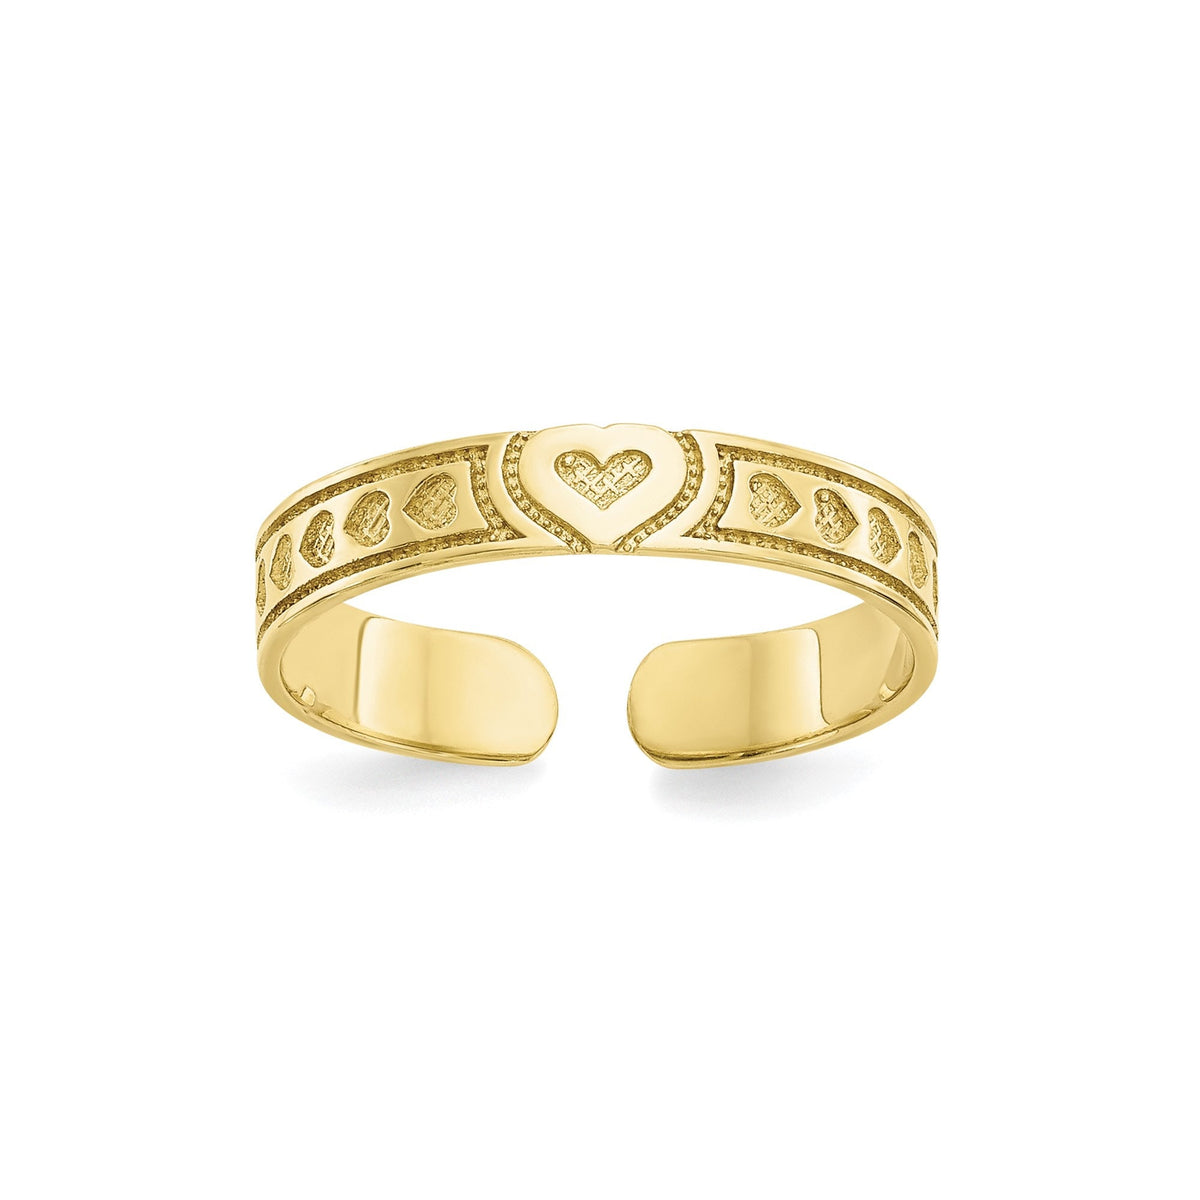 10k Yellow Gold Heart Solid Toe Ring - Gift Box Included - 10k White Gold Toe Ring - Made in USA